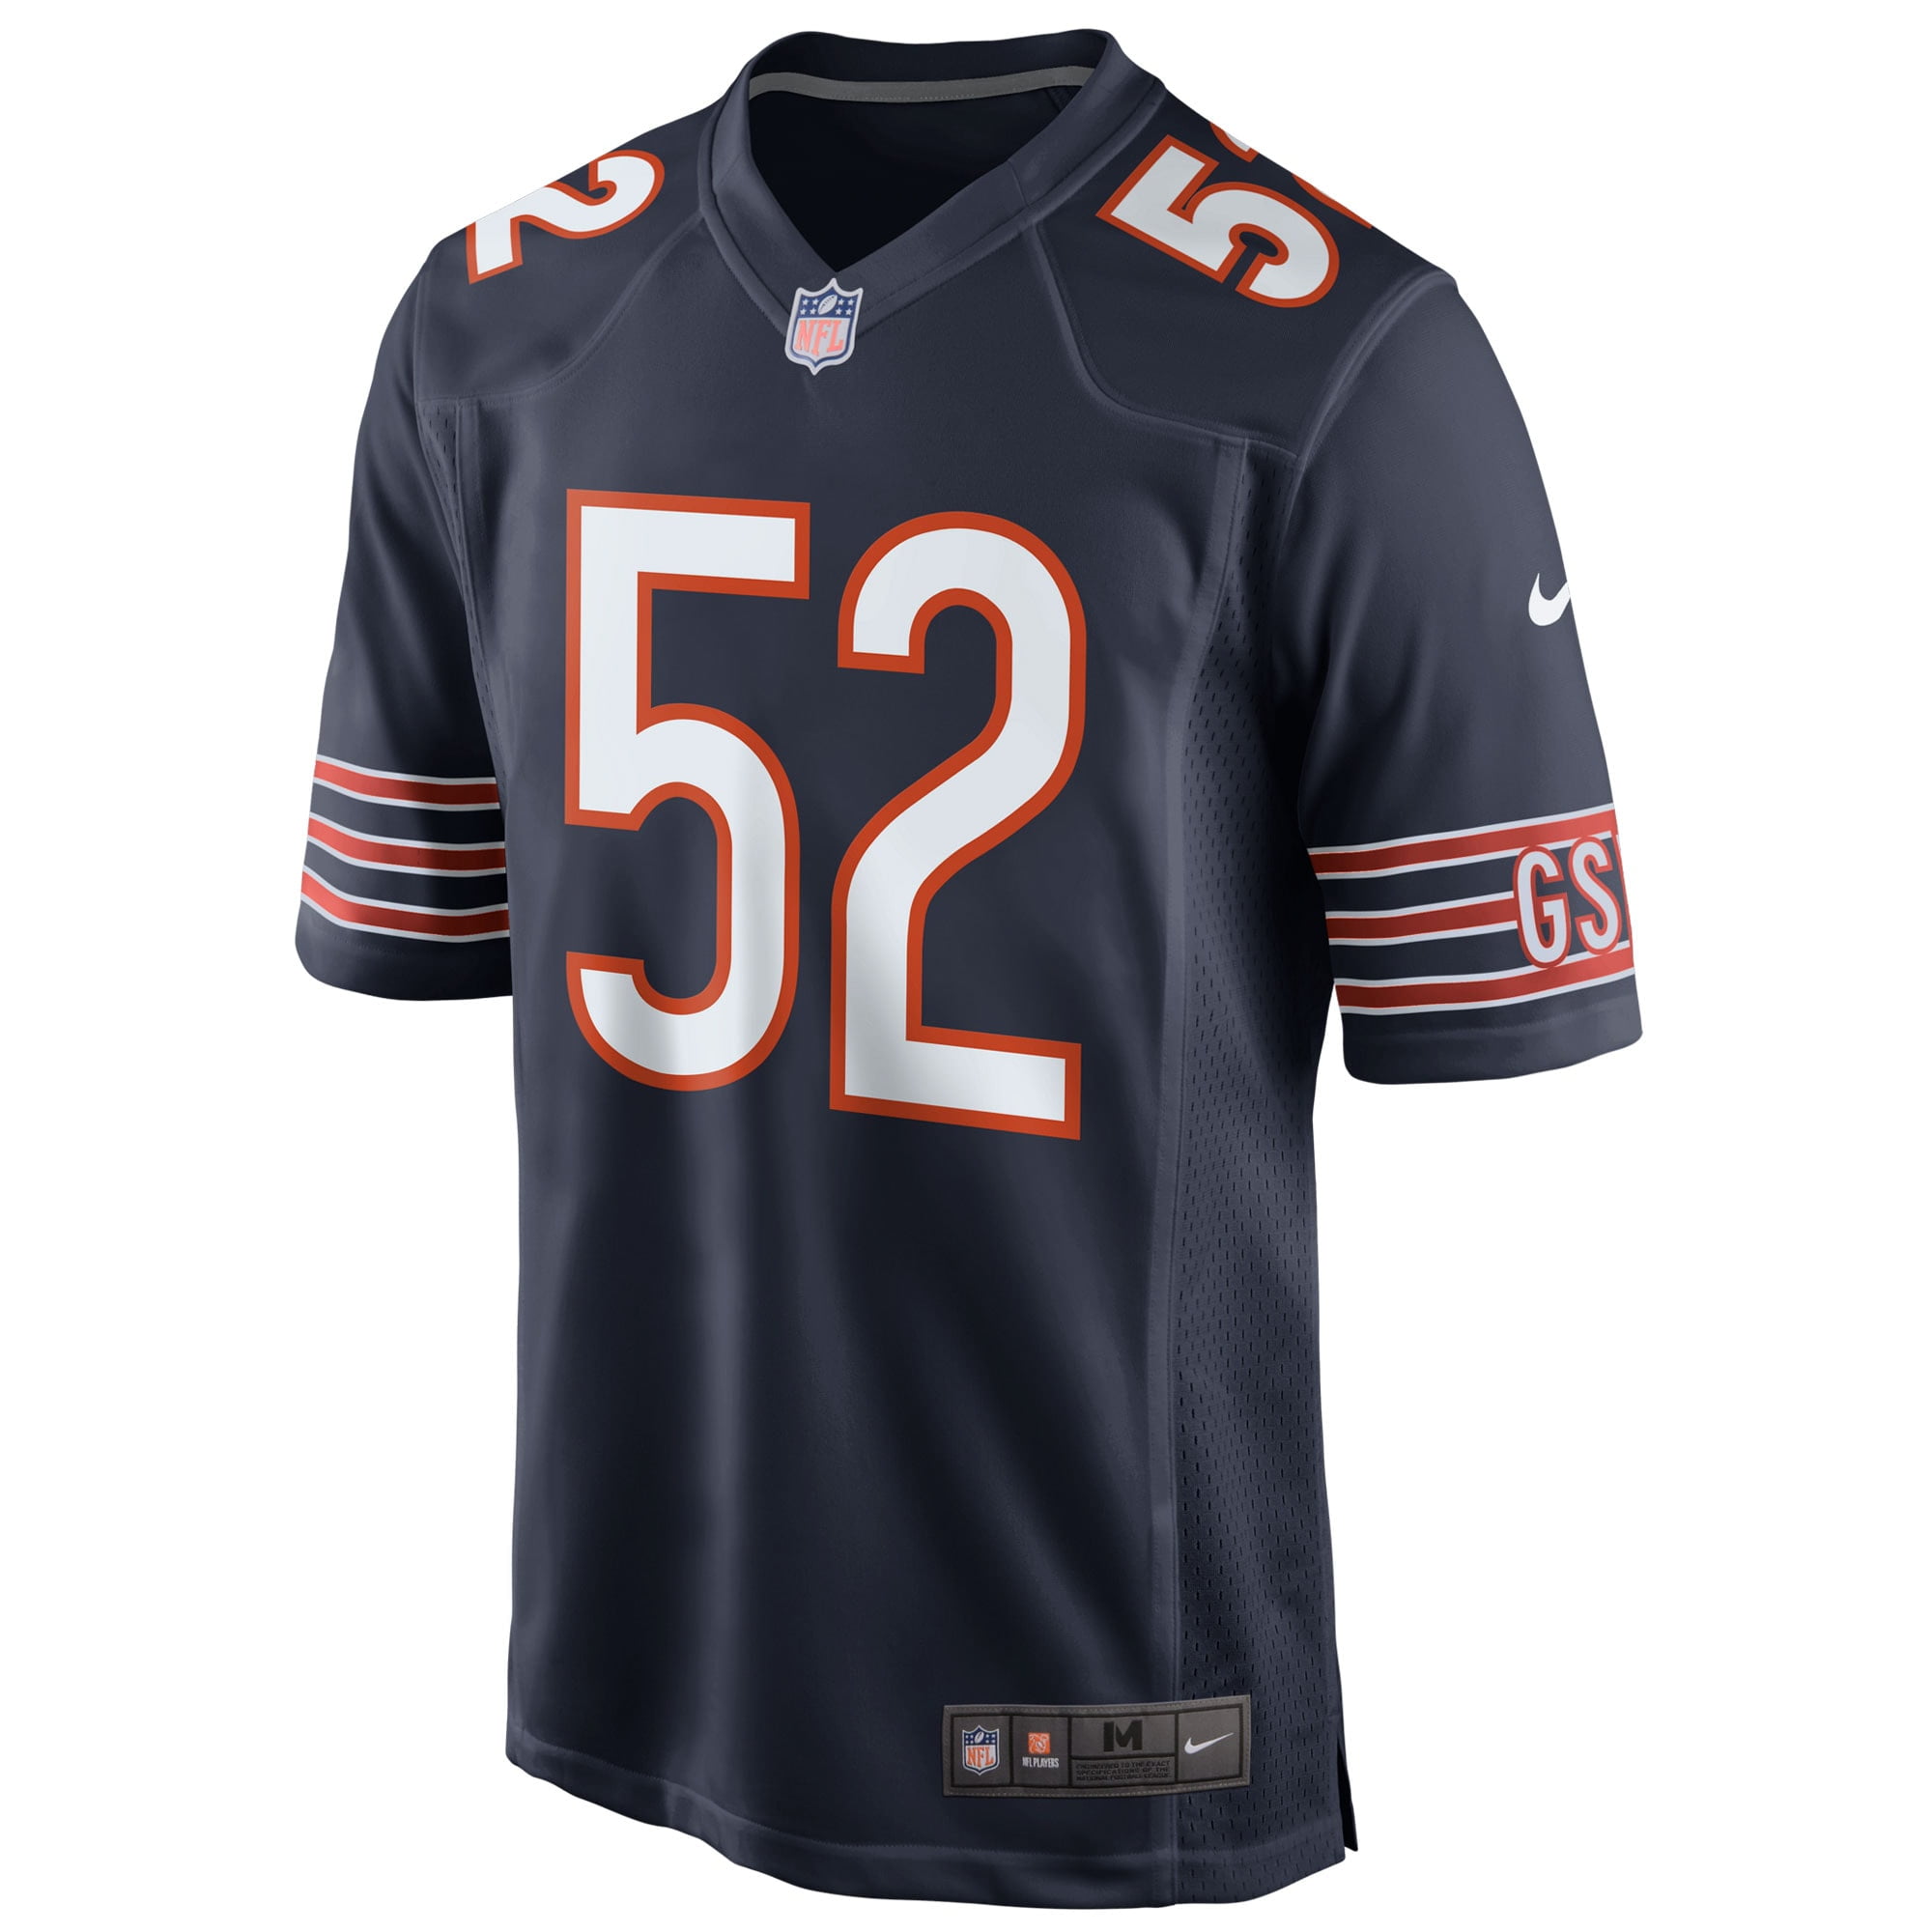 chicago bears 5t jersey